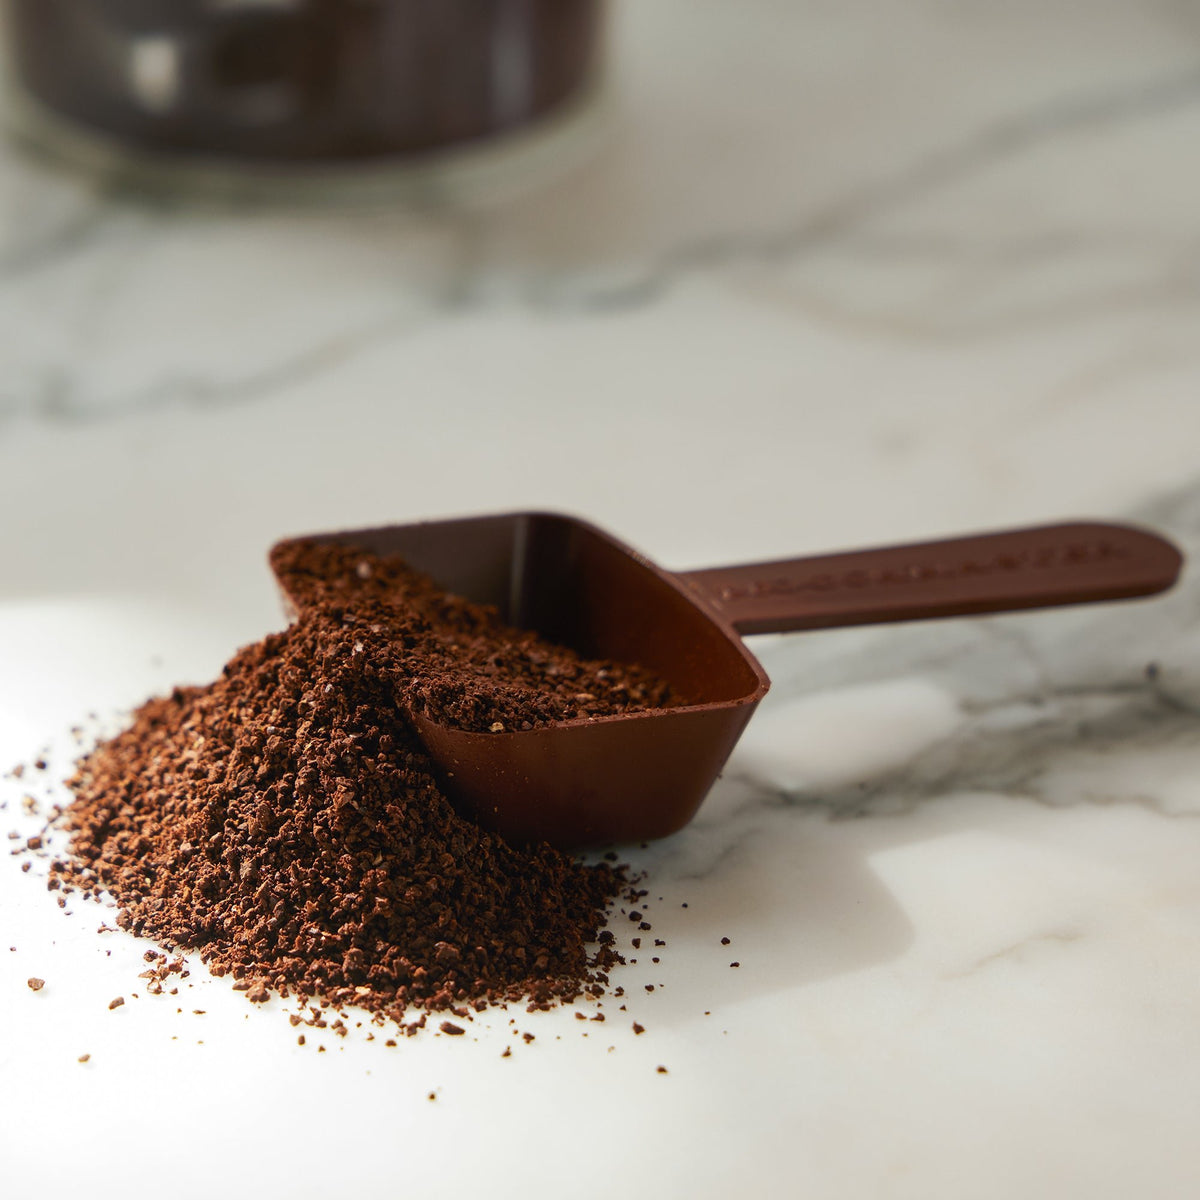 A 2-tablespoon brown coffee scoop overflowing with coffee grounds.